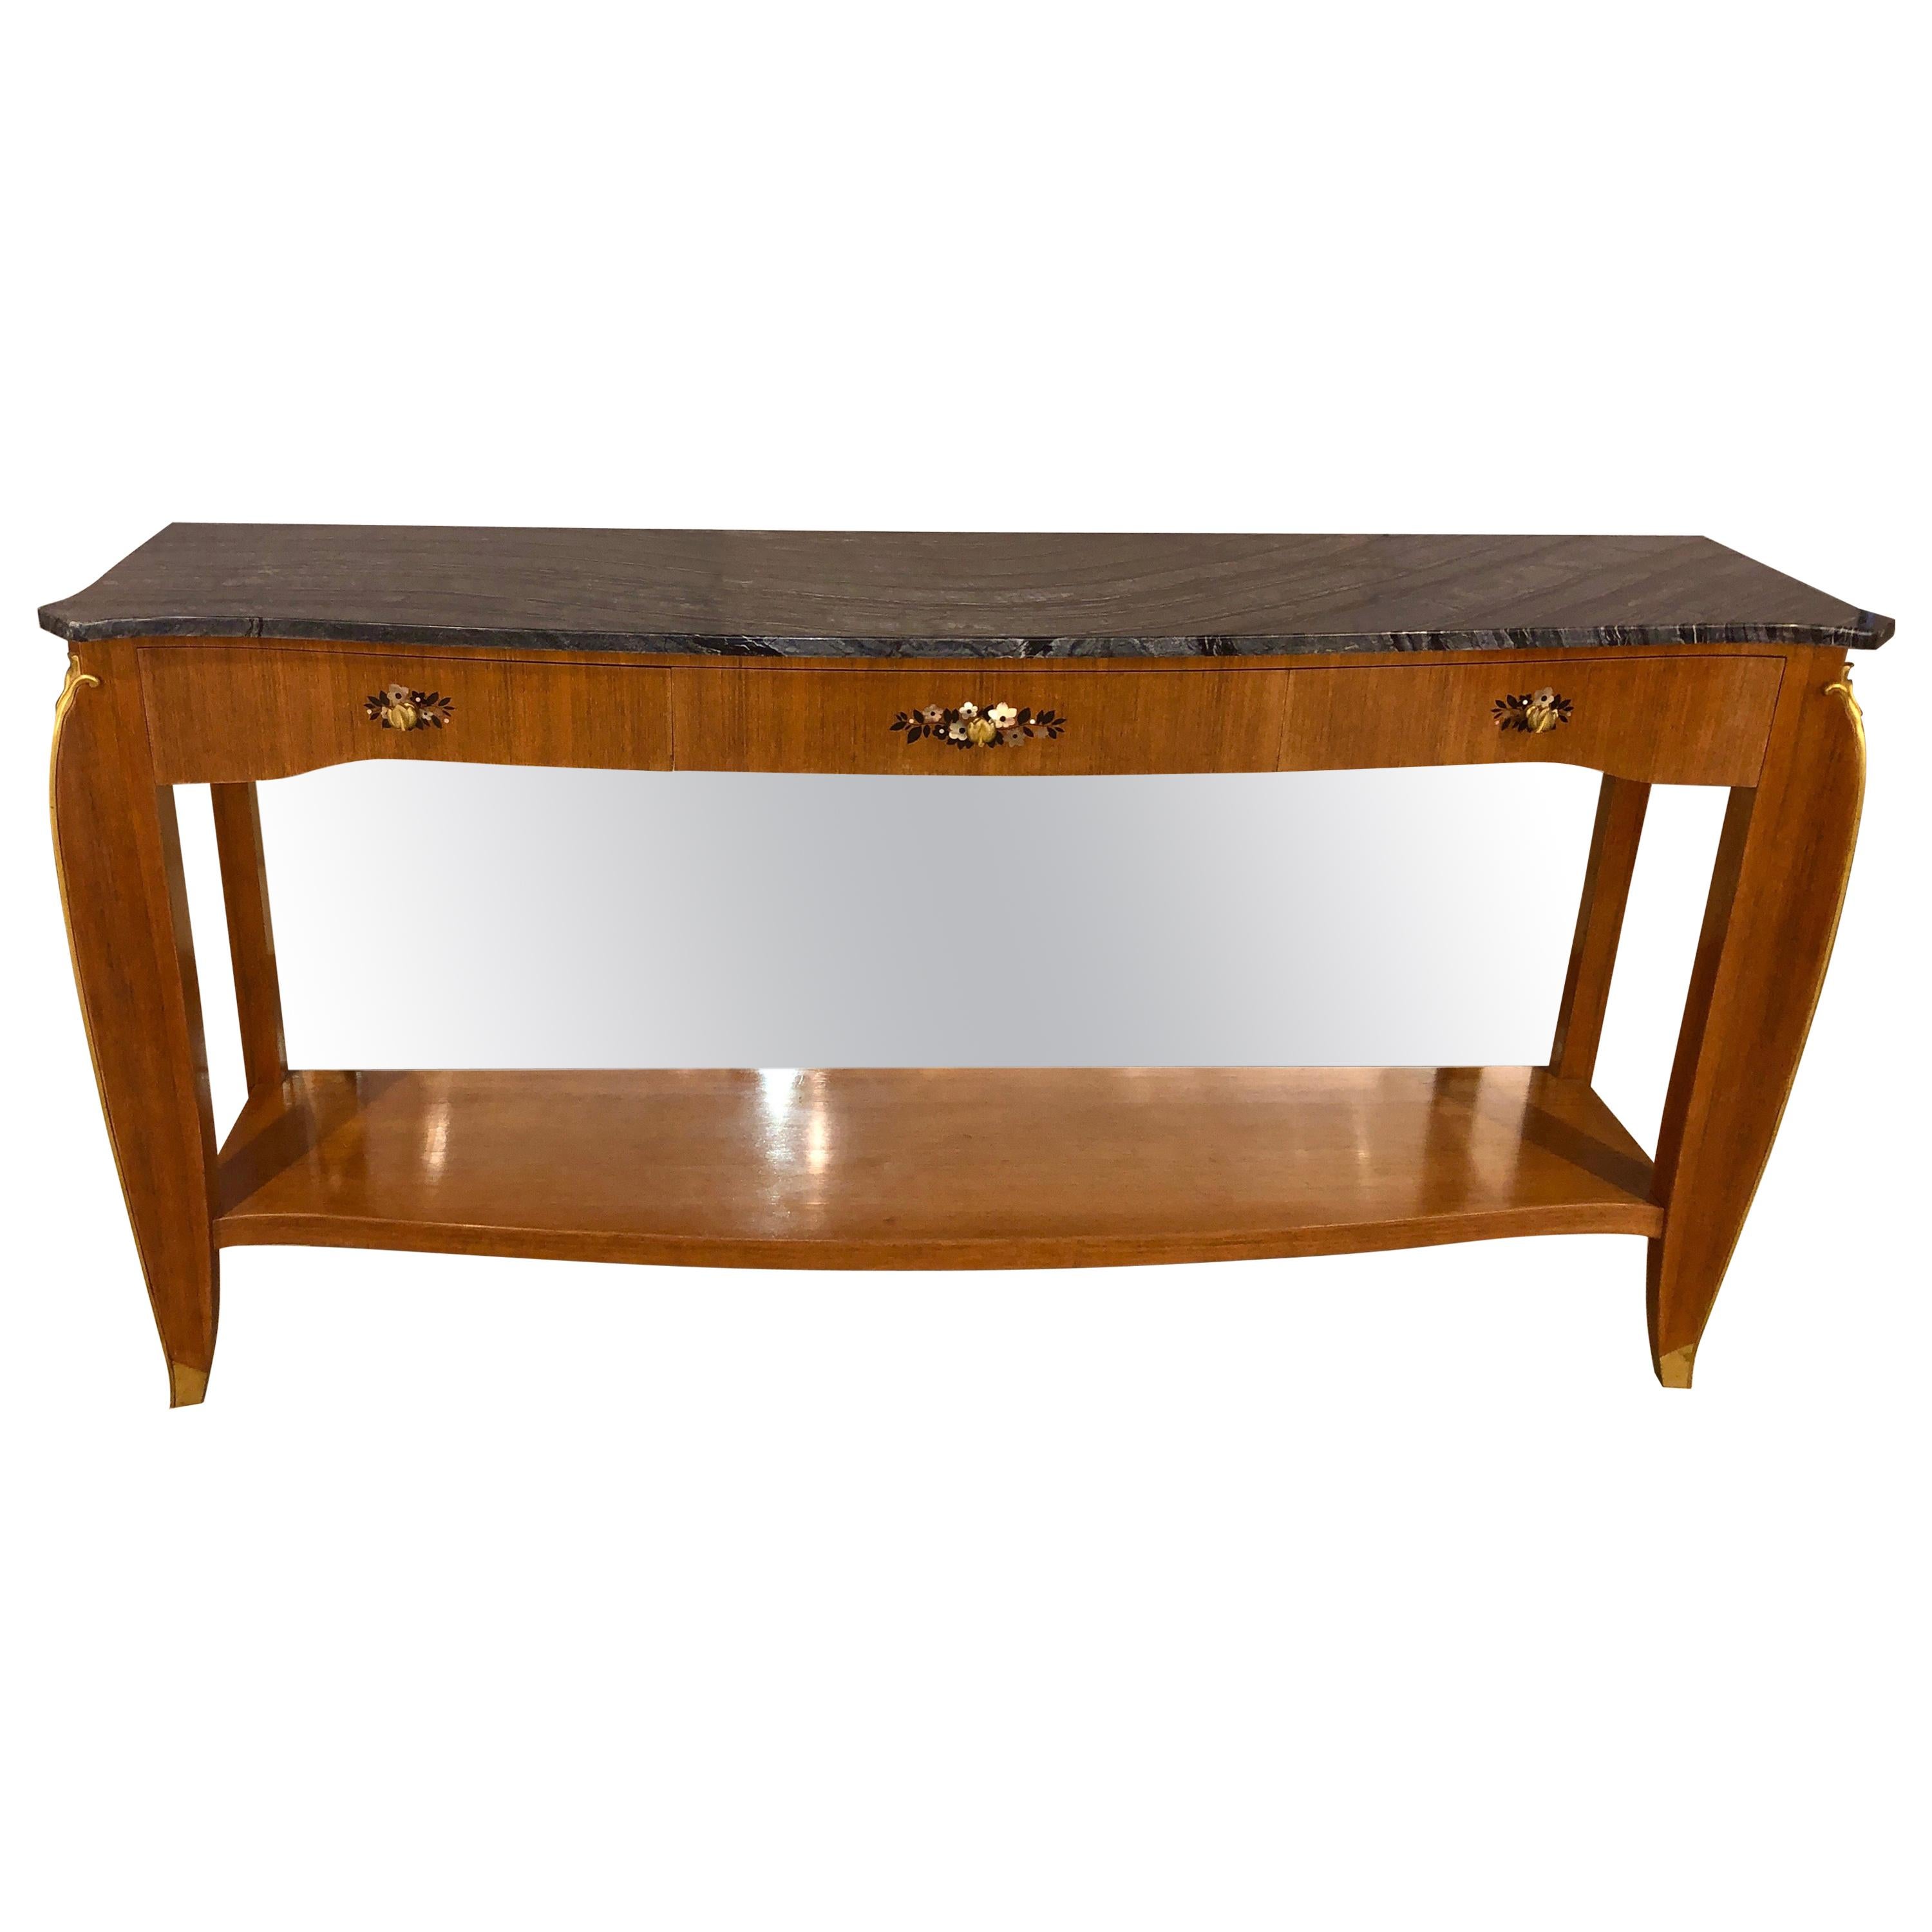 Jules Leleu Bronze Mounted and Inlaid Console Table